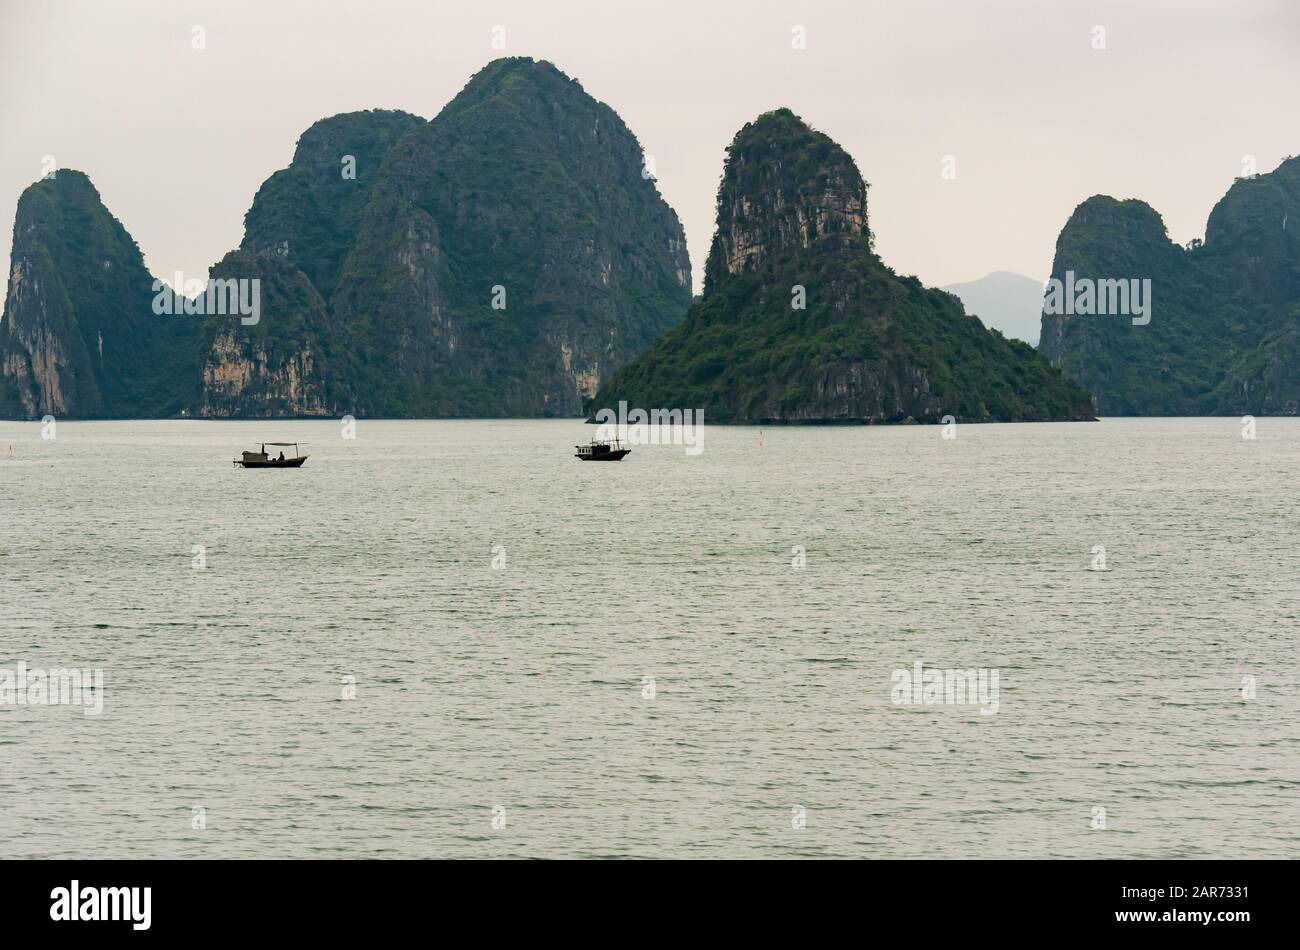 Traditional fishing boats with limestone karst rock formations, Halong Bay, Vietnam, Asia Stock Photo